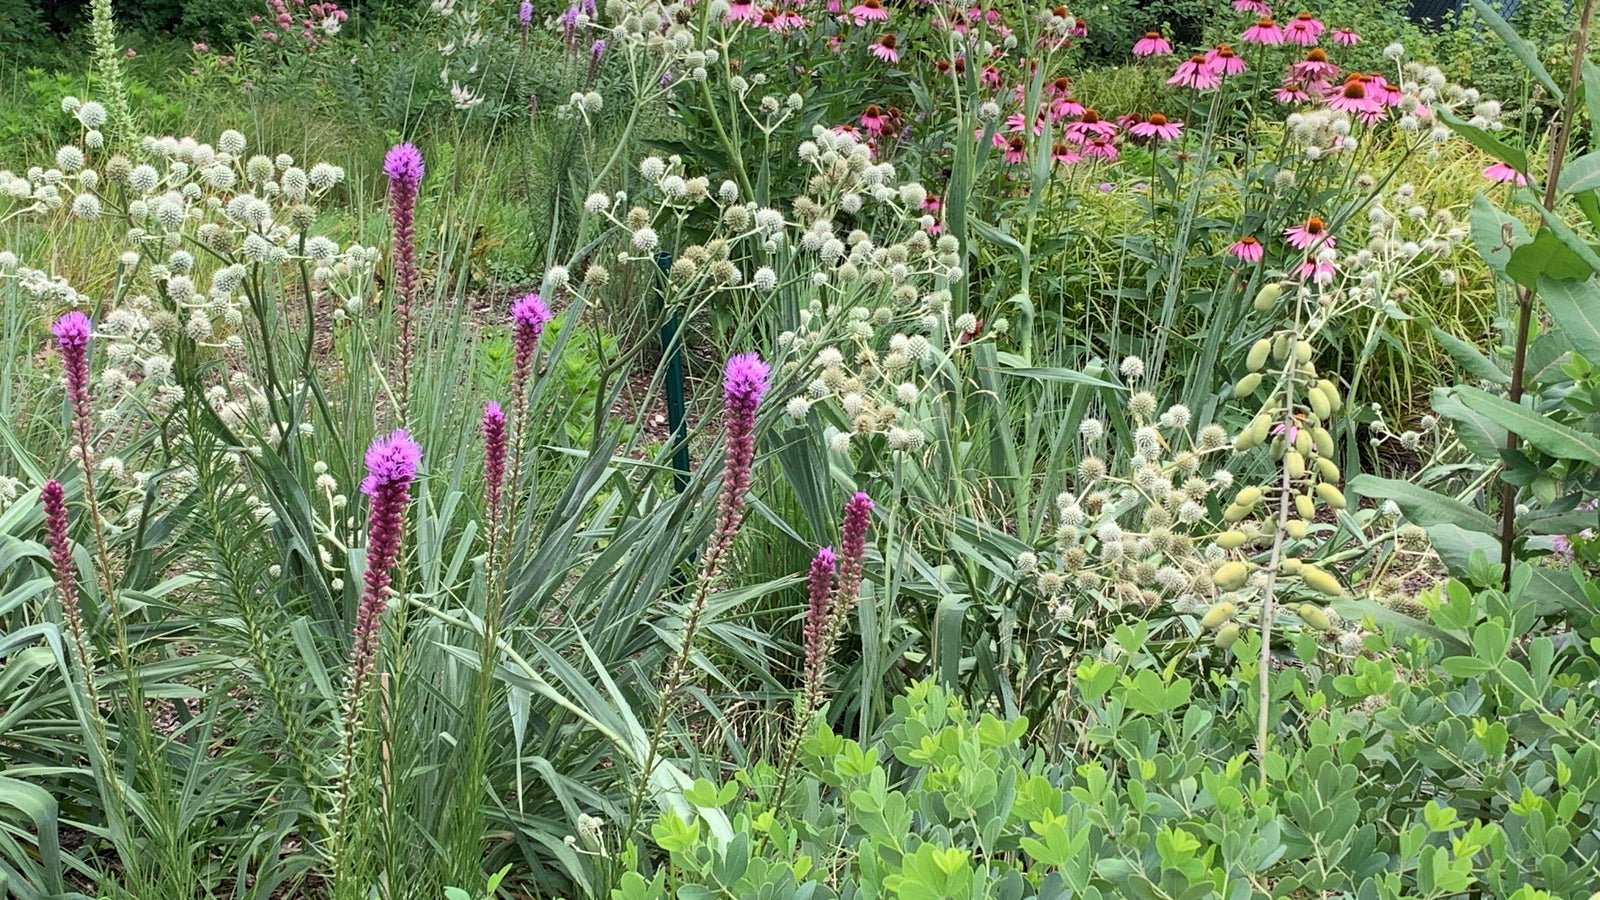 Rain gardens in action: what's the deal? - Red Stem Native Landscapes